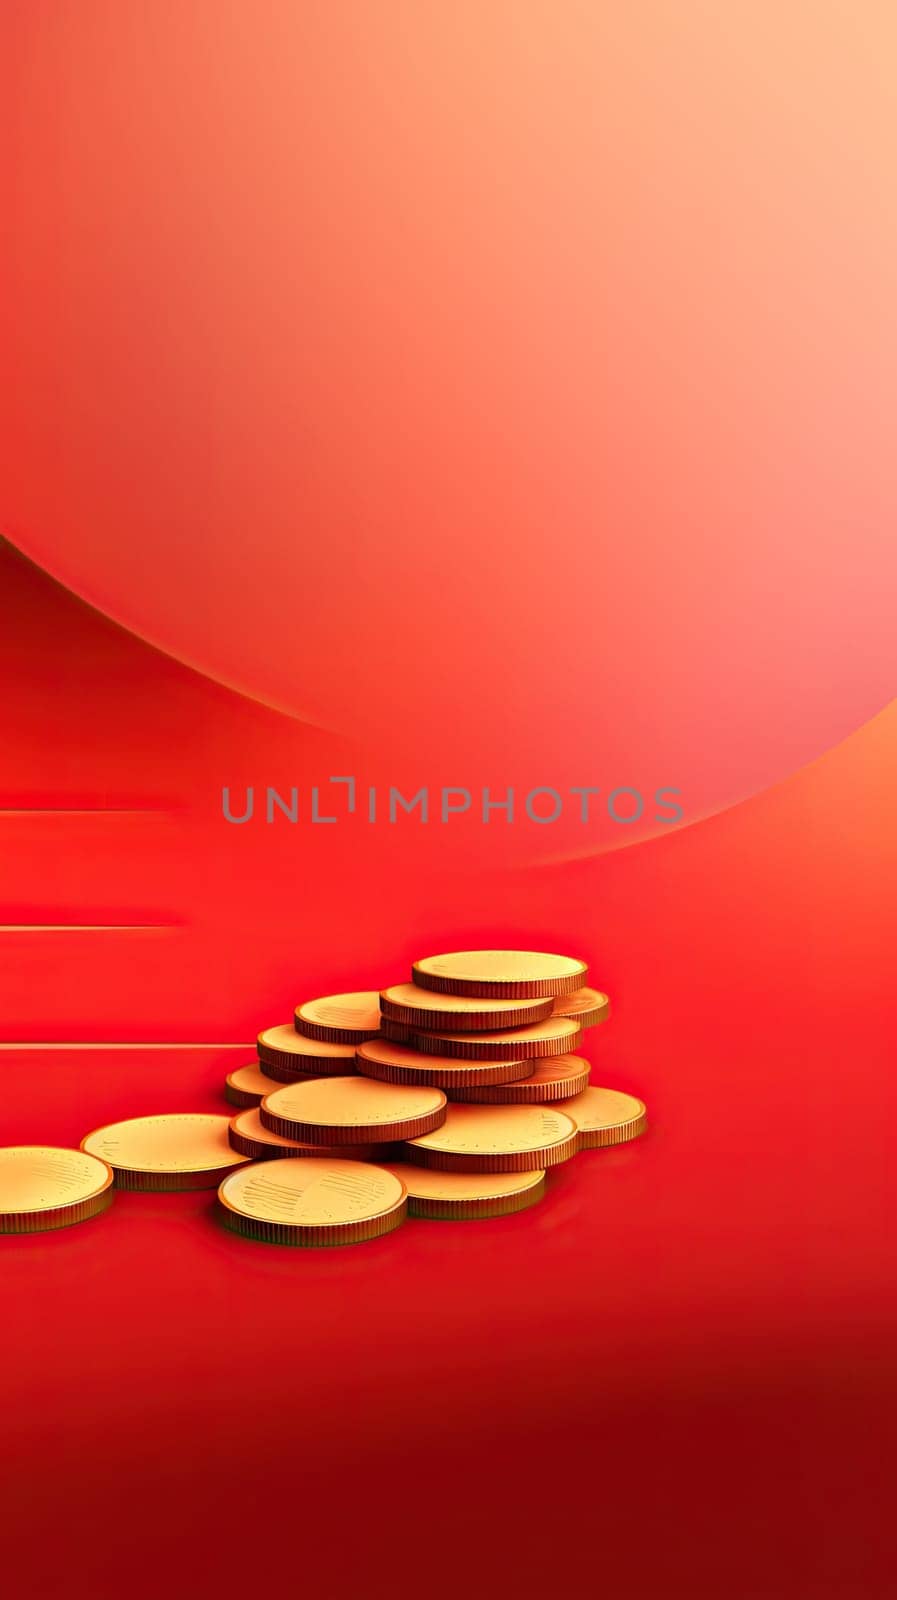 Abstract chinese background with golden coins isolated on red with copy space by papatonic